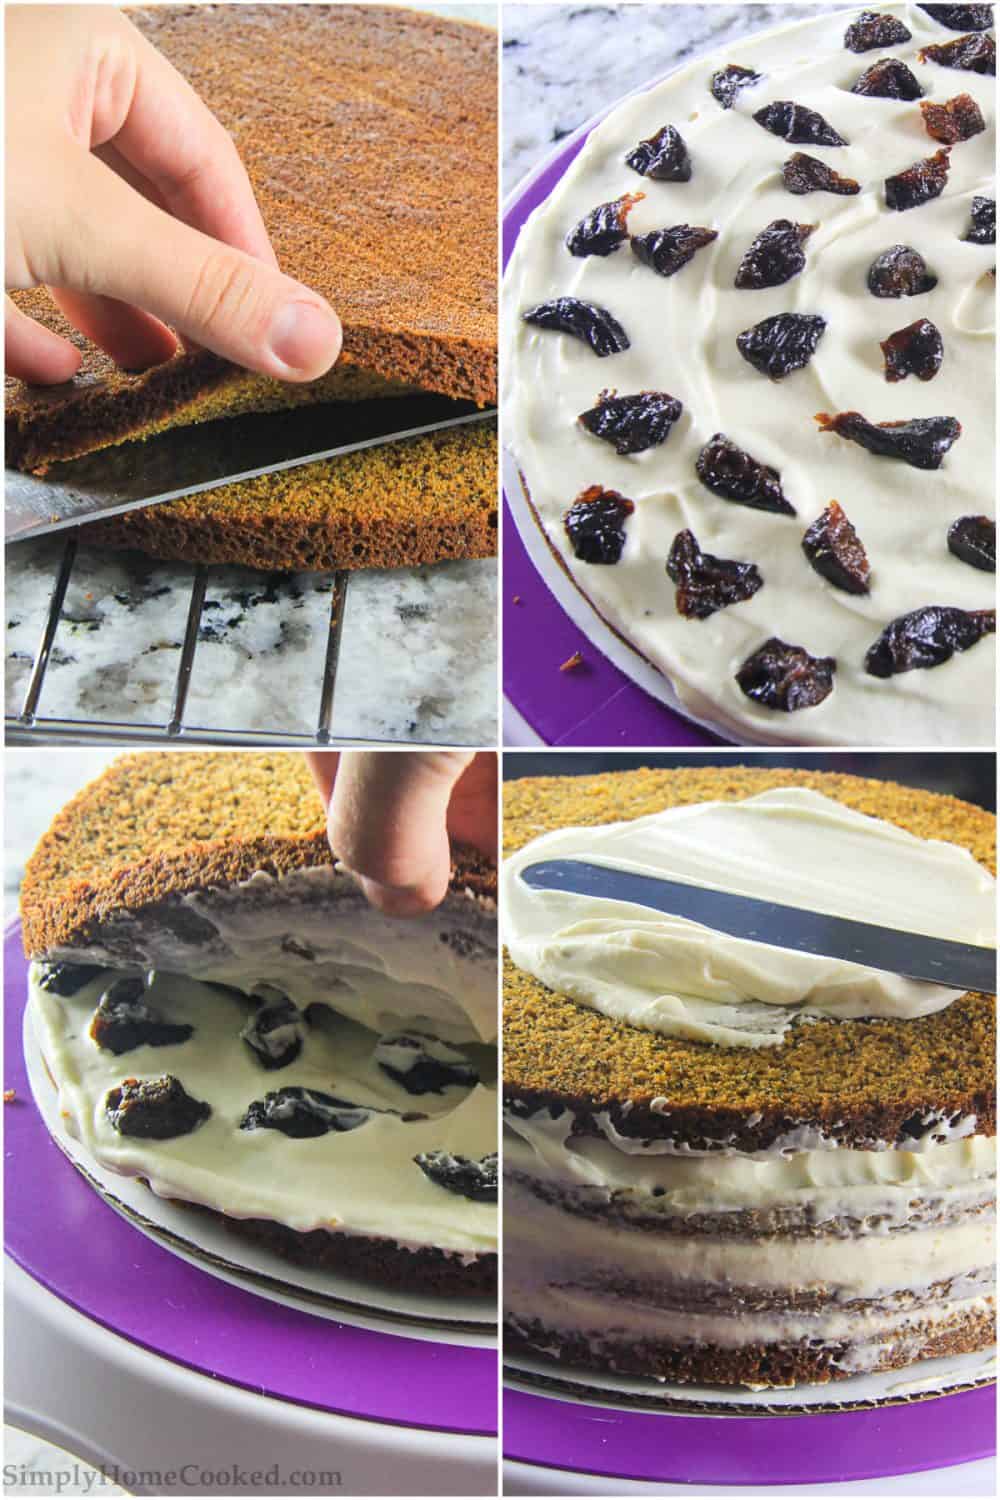 Four tiled images of a Poppy Seed Honey Cake being assembled by cutting the cake and spreading cream frosting and plums between the layers before frosting the outside.